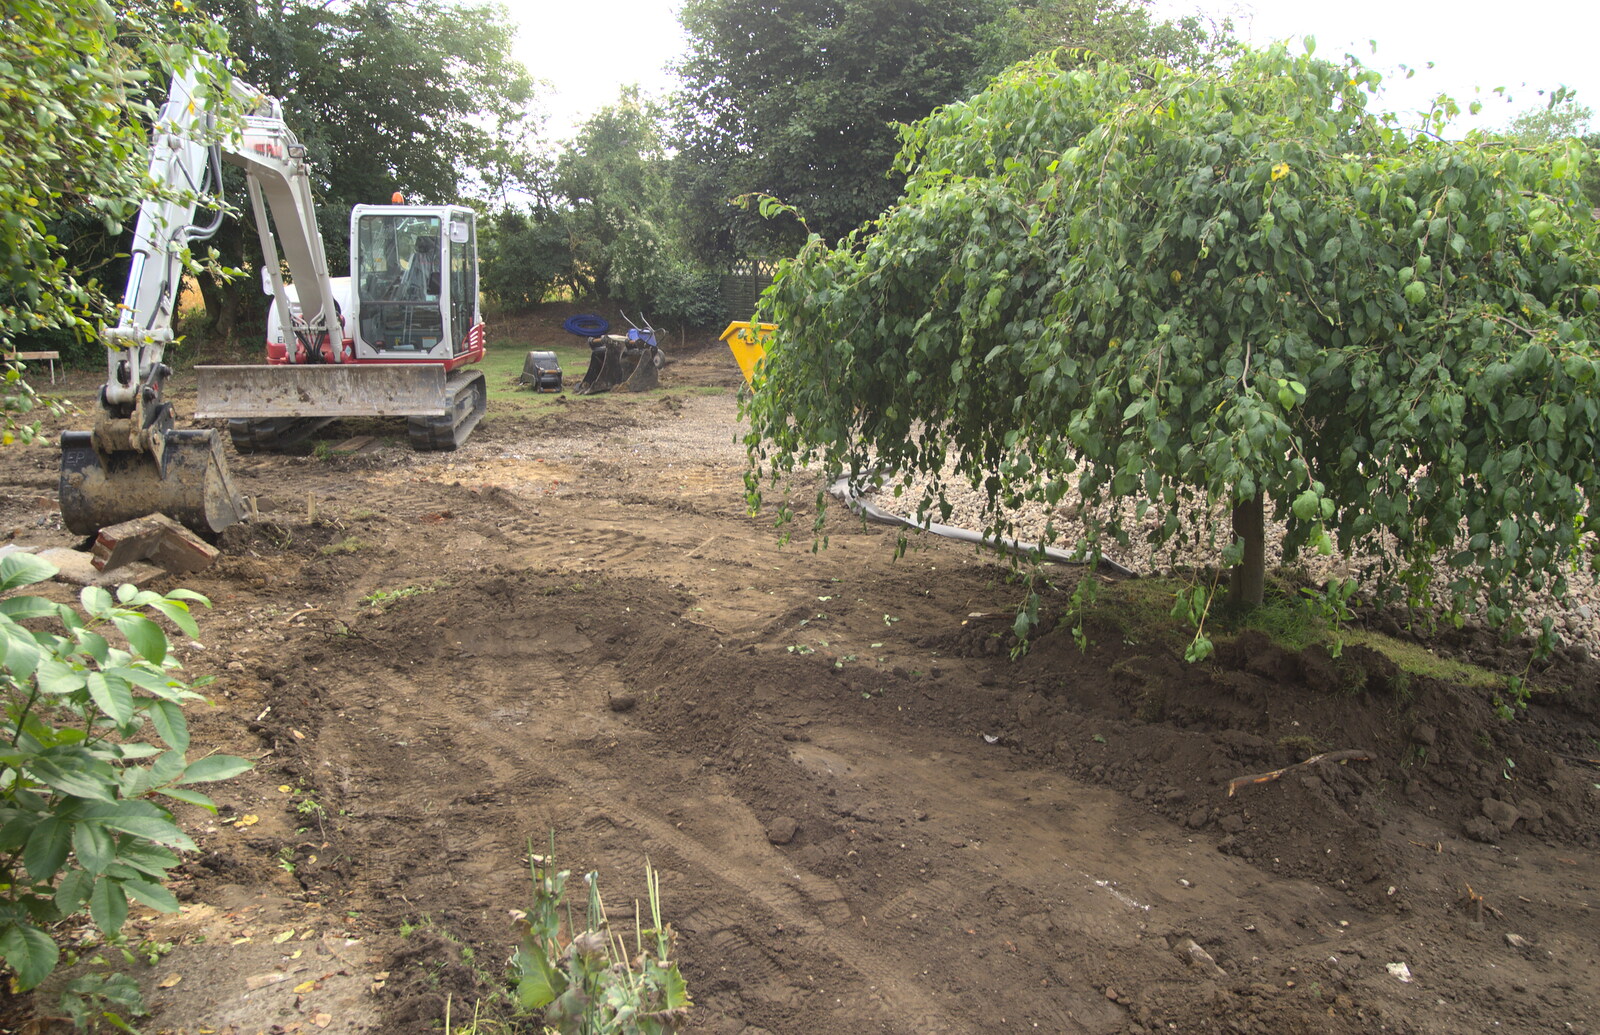 The front garden is scraped away from Grand Designs: Building Commences, Brome, Suffolk - 8th August 2013